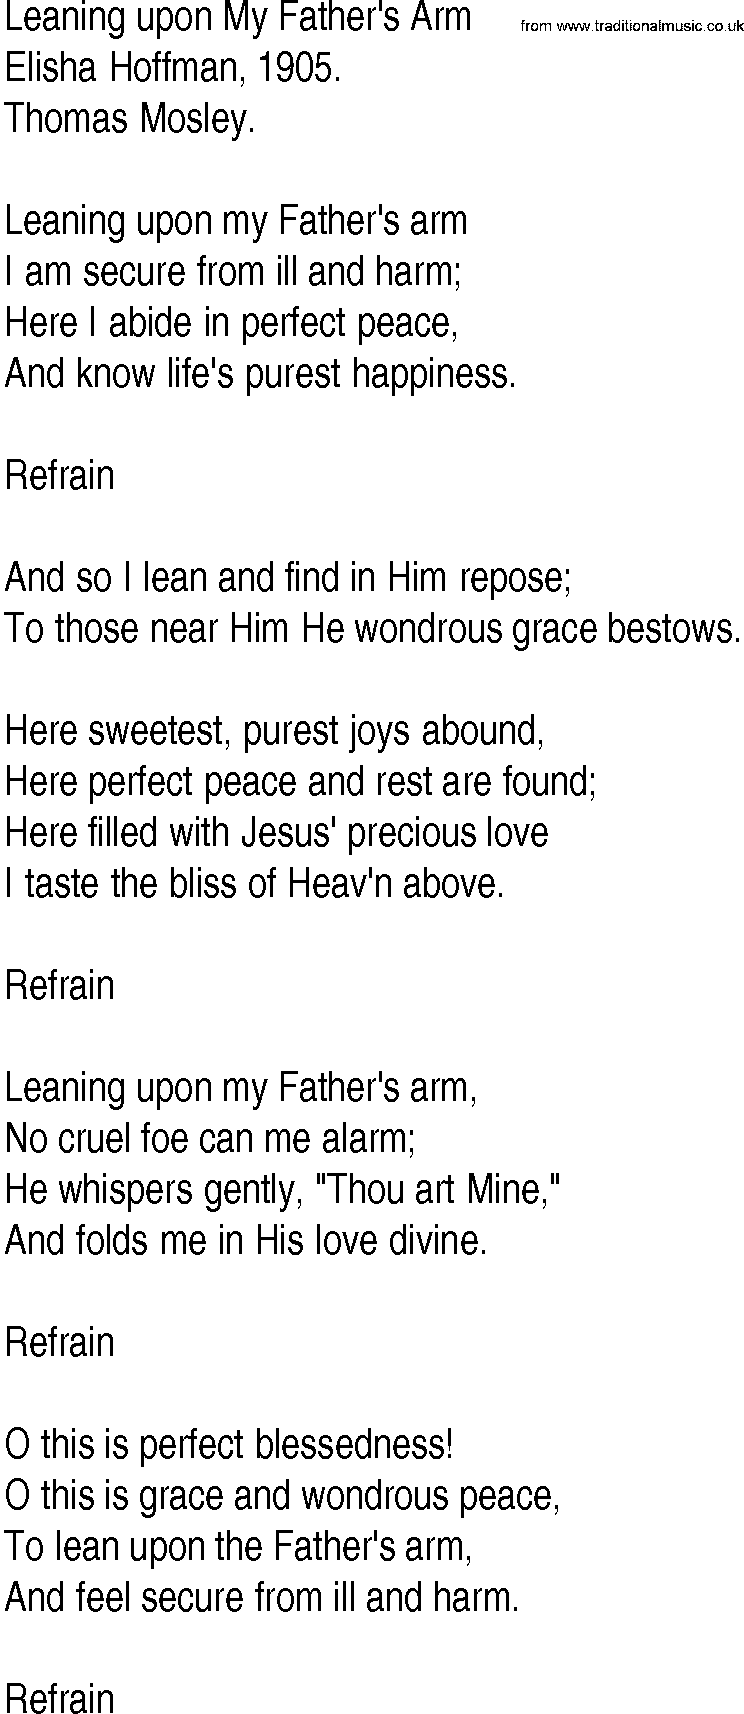 Hymn and Gospel Song: Leaning upon My Father's Arm by Elisha Hoffman lyrics